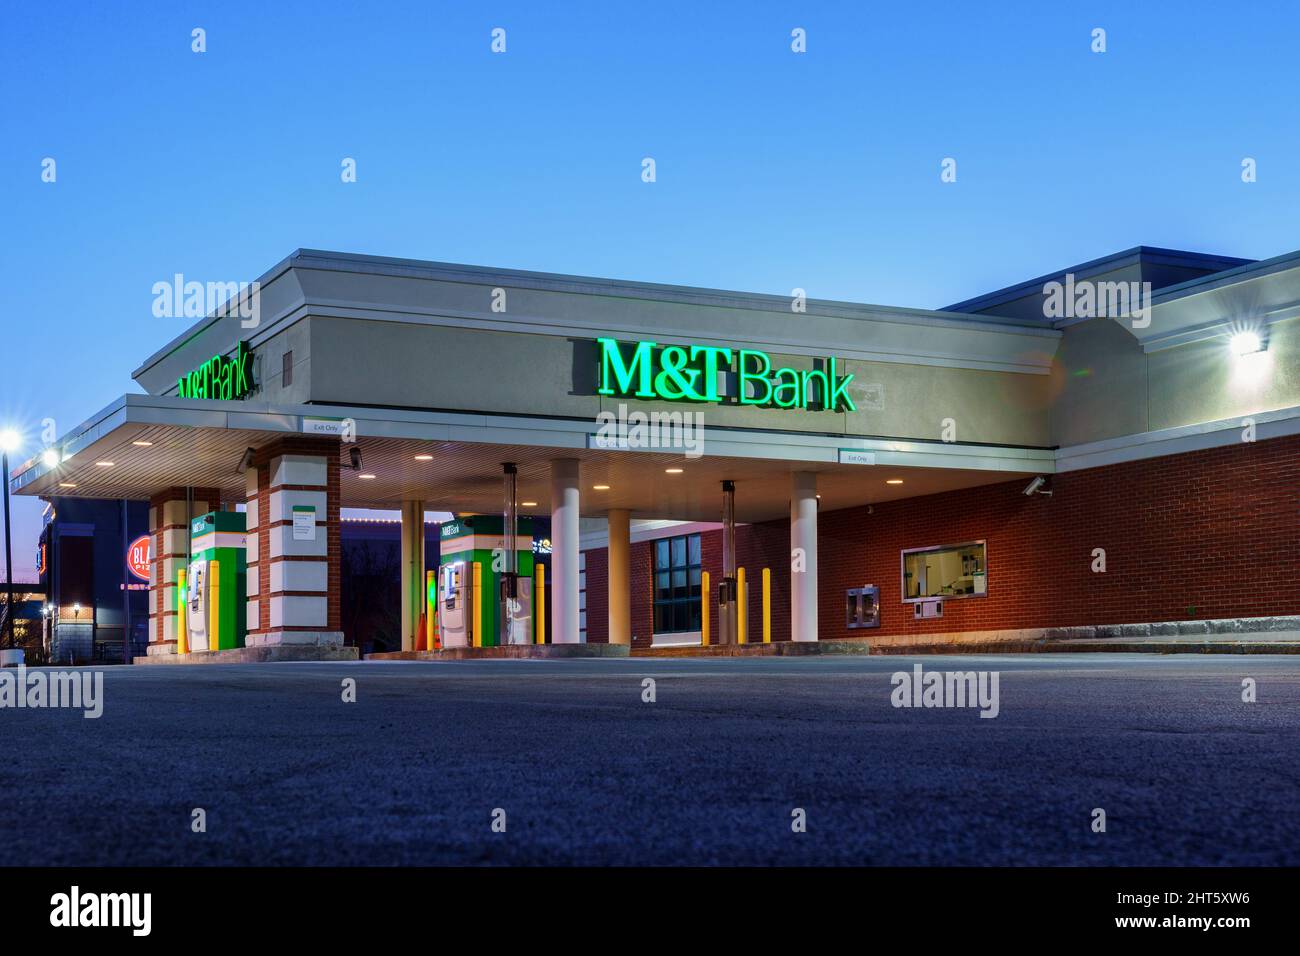 New Hartford, New York - Feb 24, 2022: Wide Night View of M&T Bank Building Drive Thru. M&T Bank Corporation is an American bank holding co. headquart Stock Photo